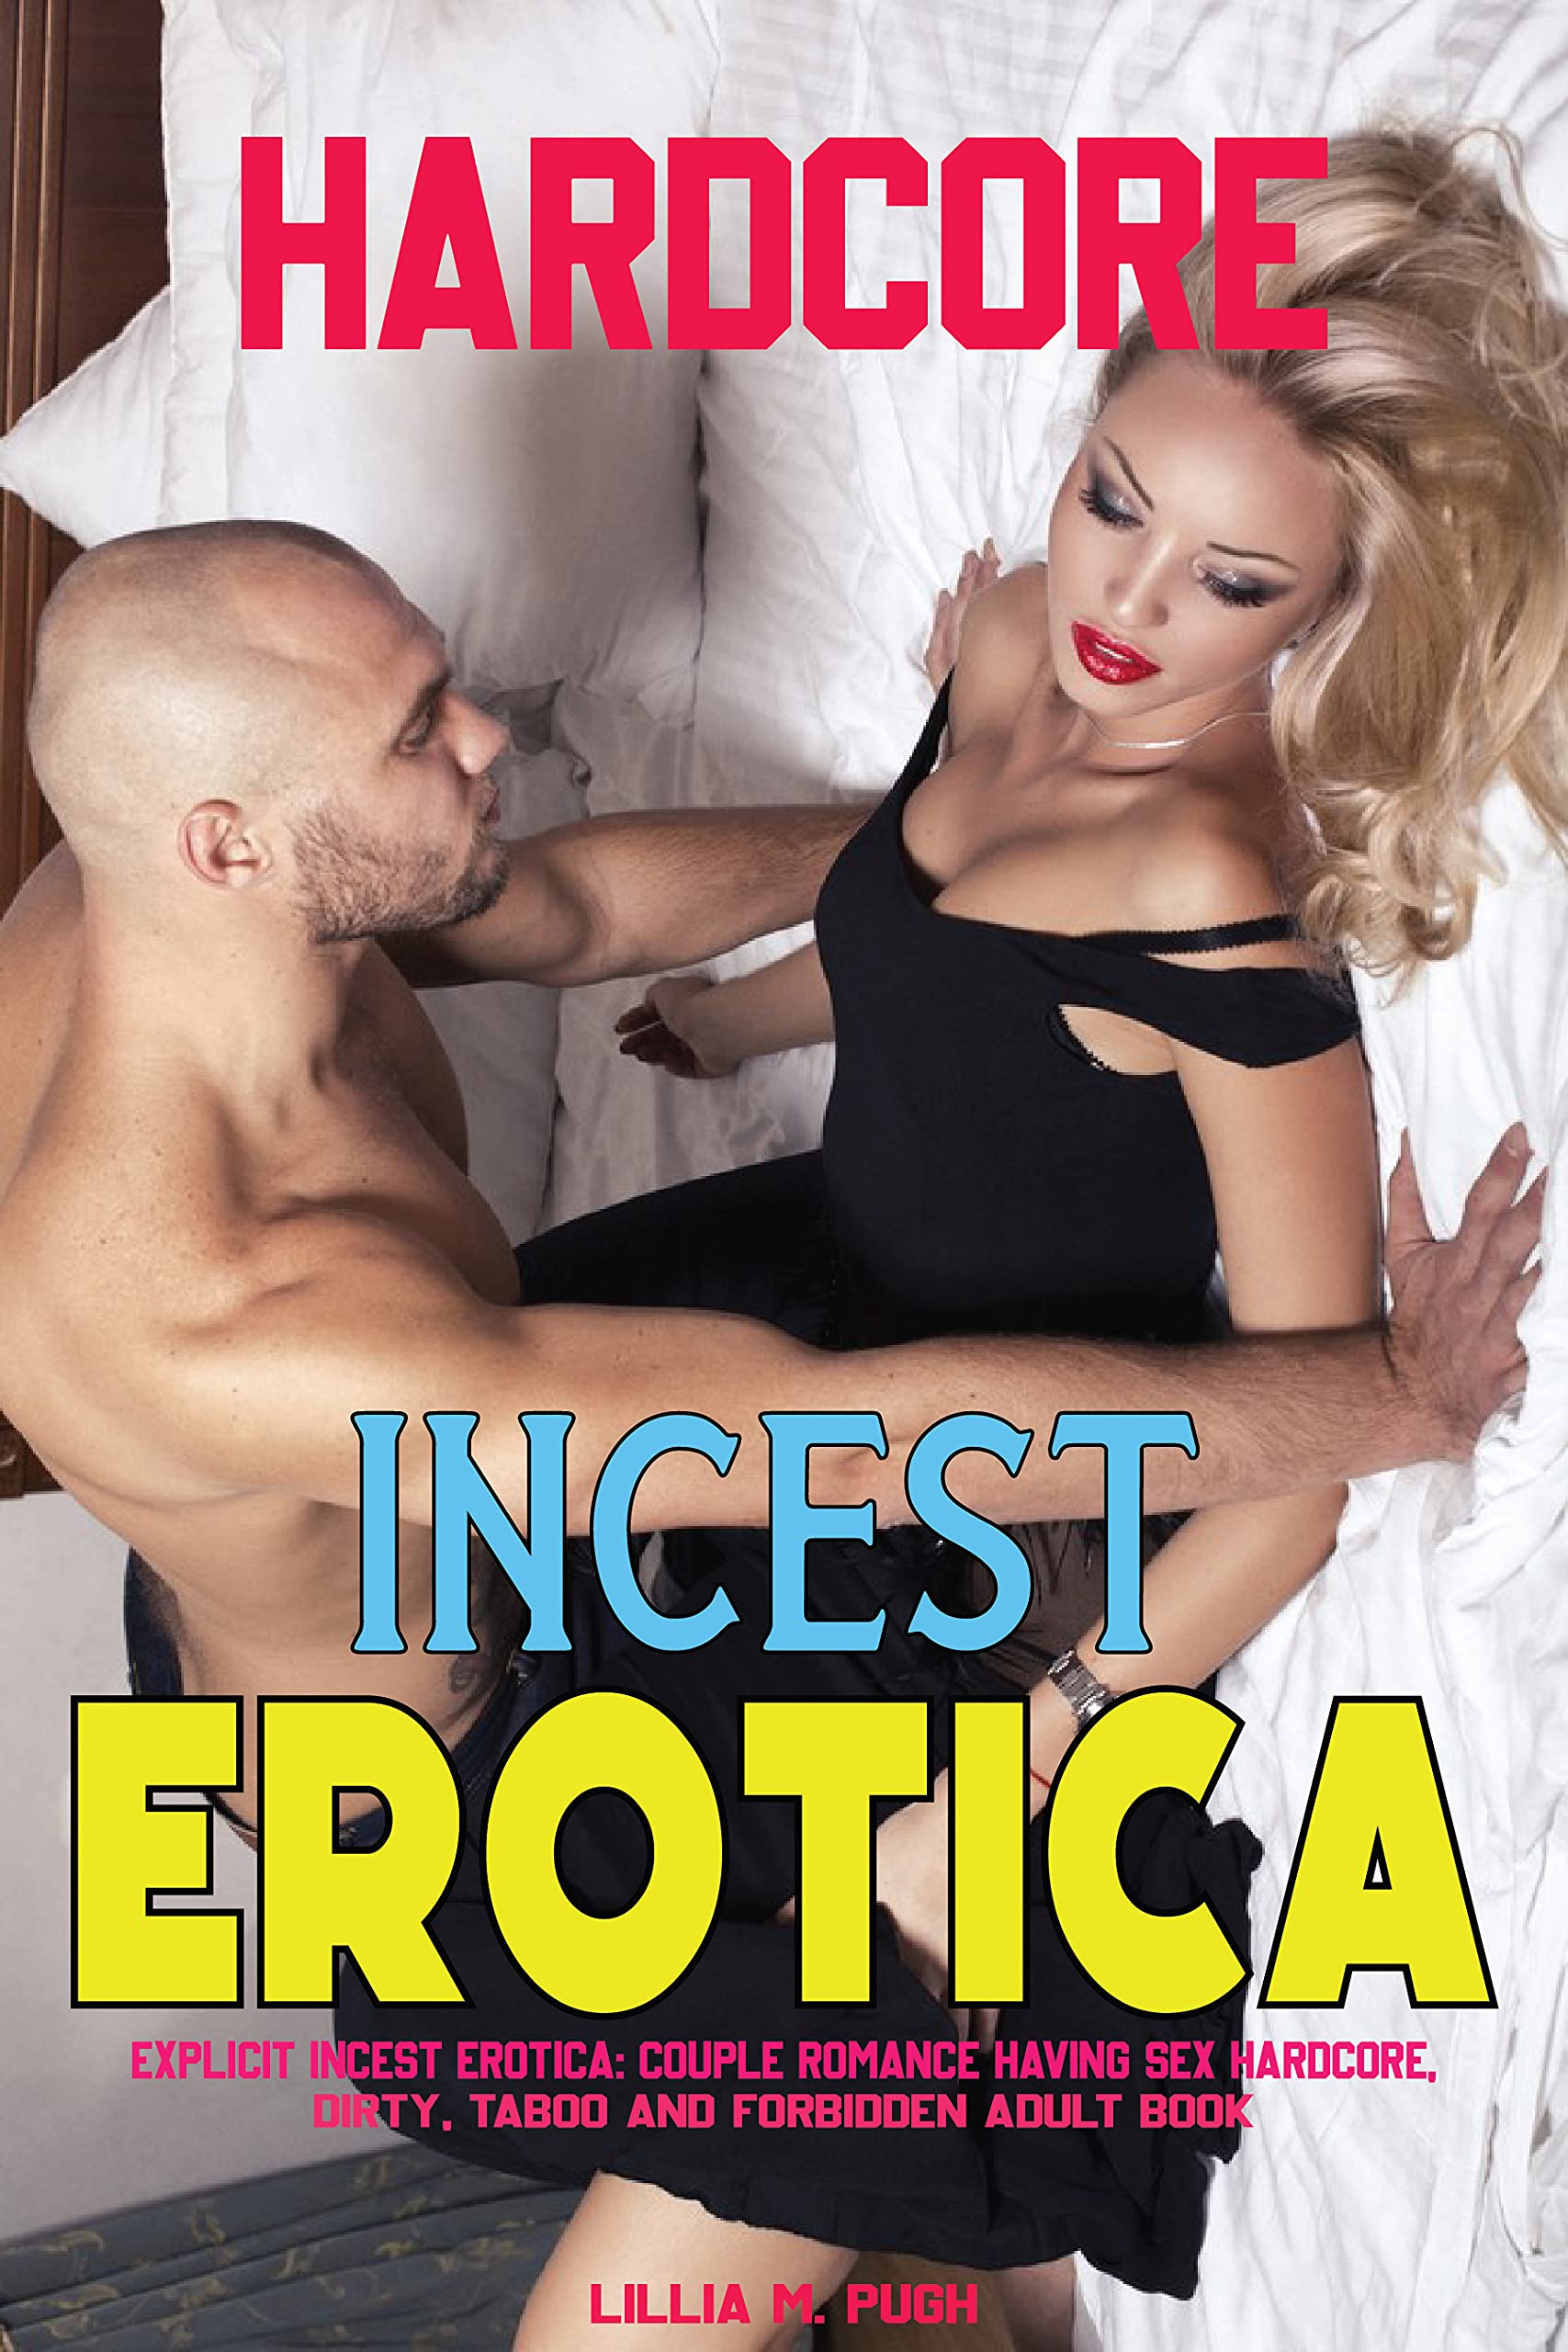 becky seavey recommends erotica hardcore pic